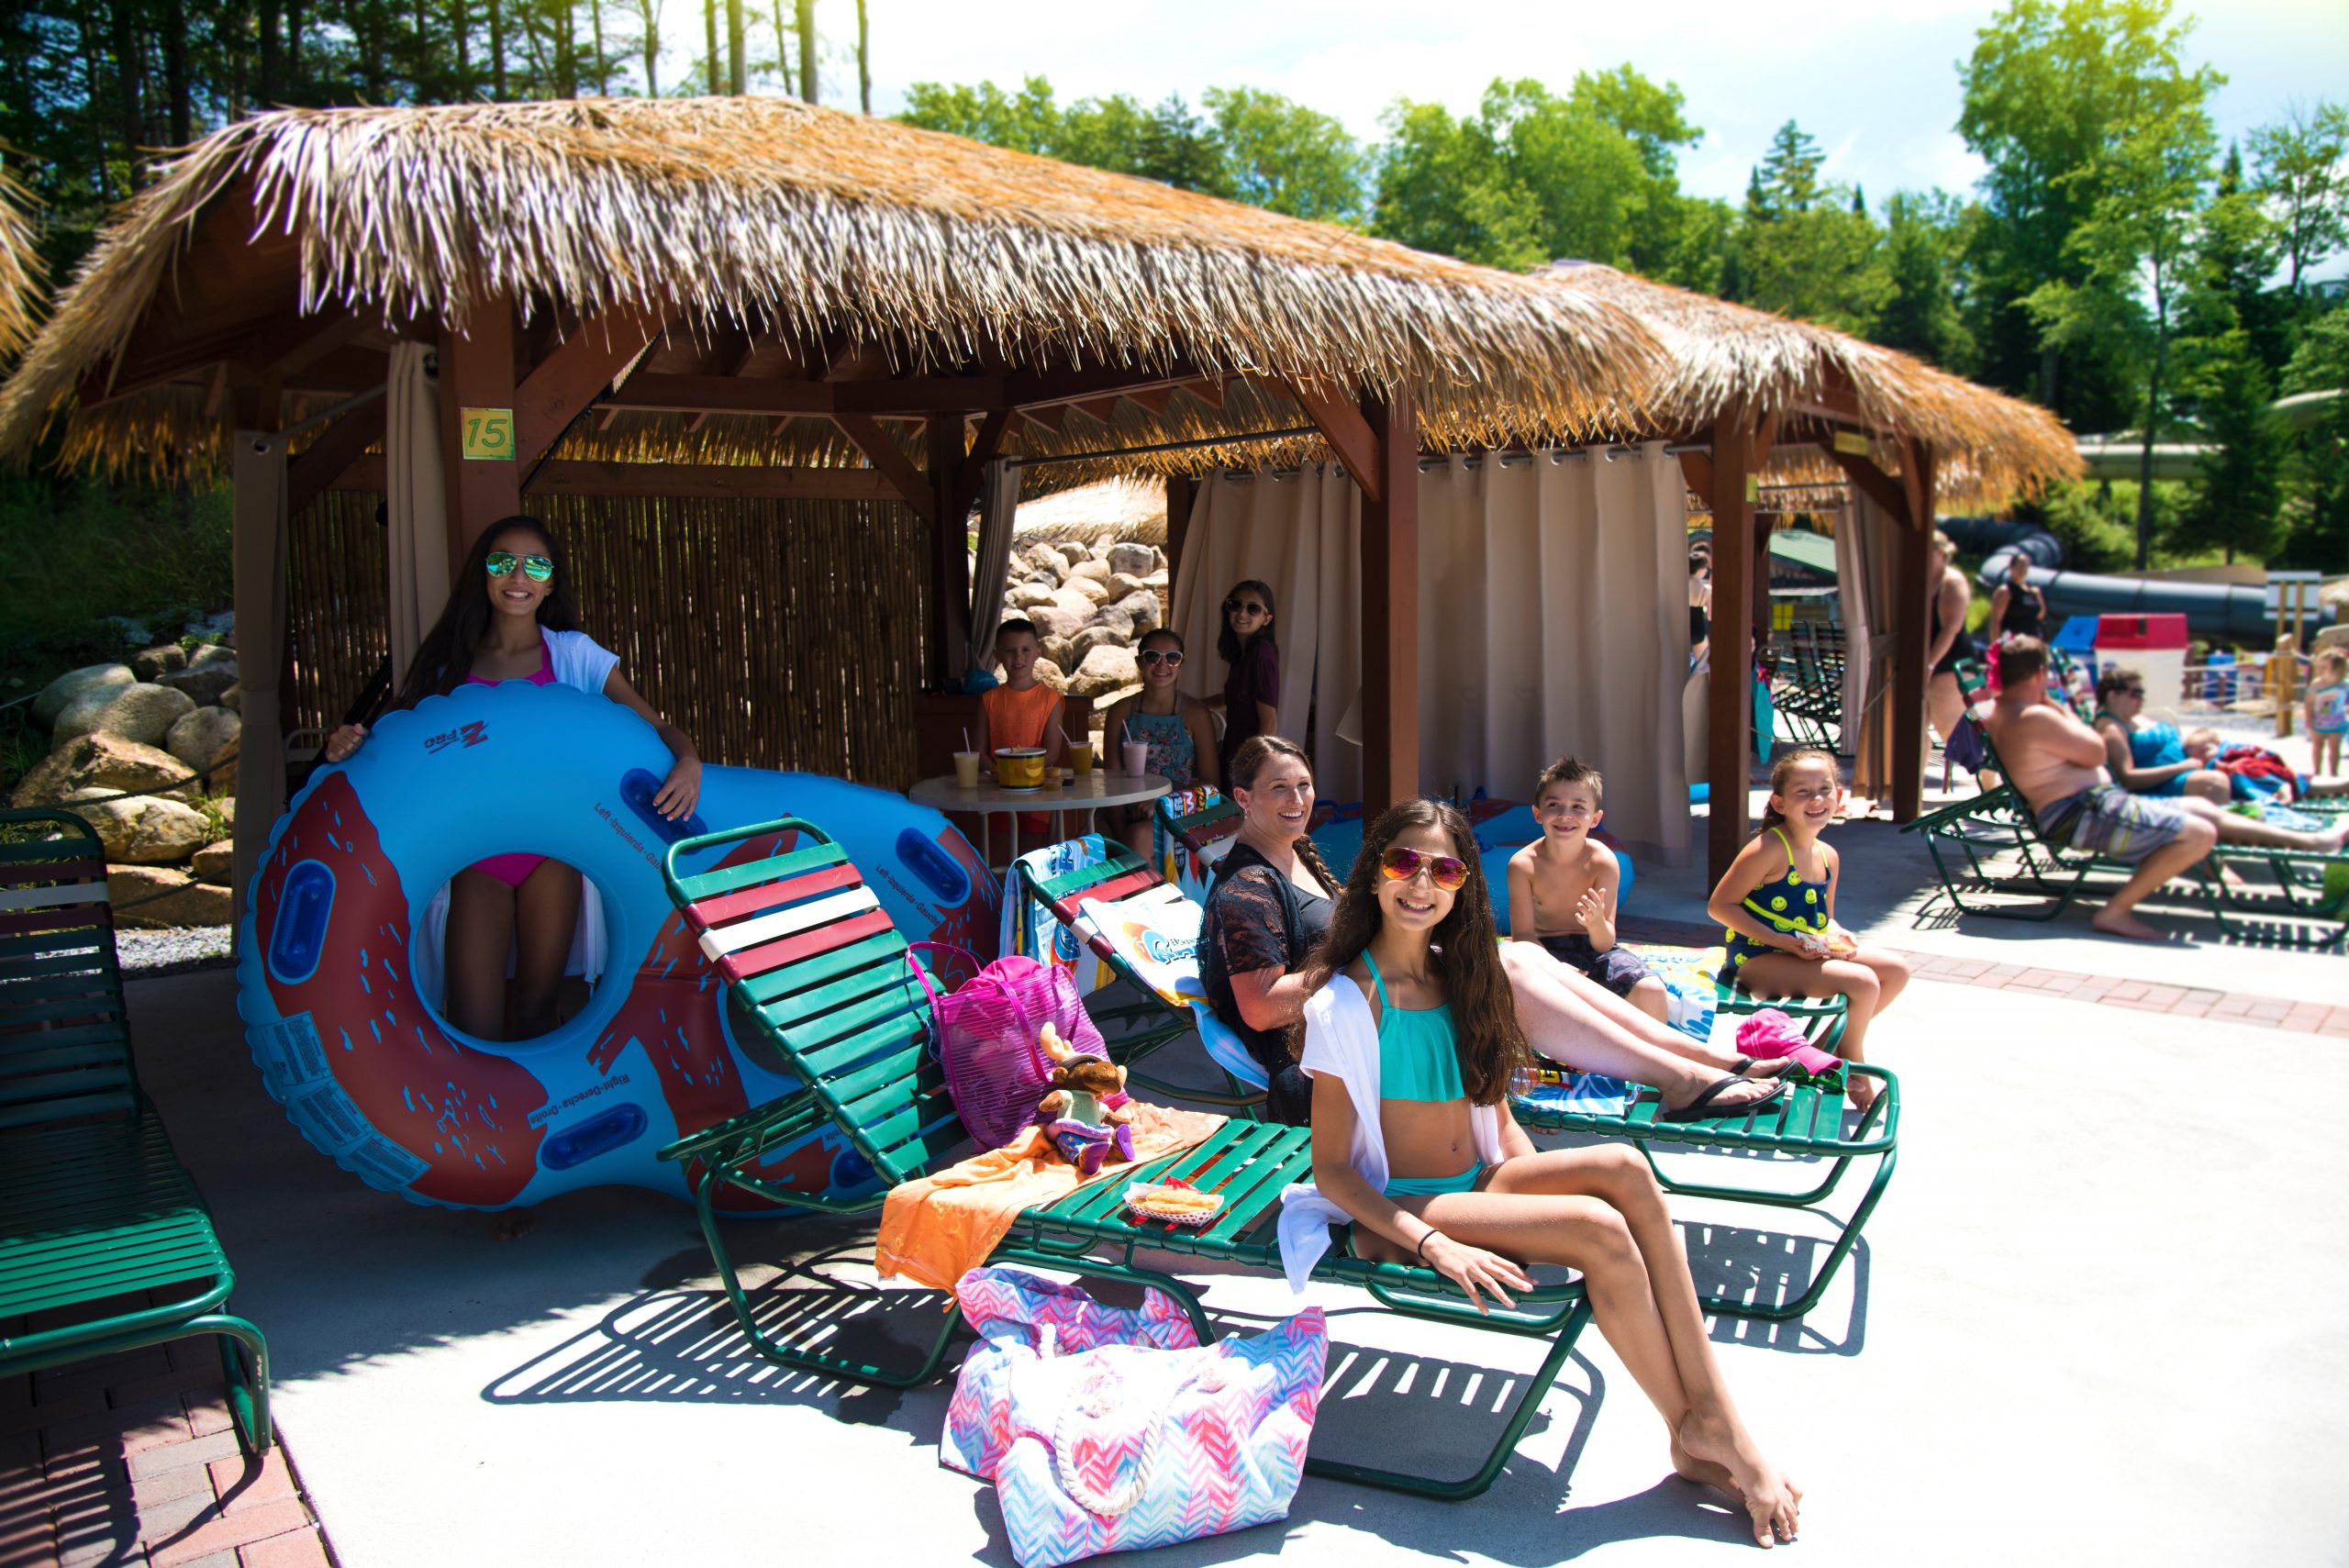 An image of a group of people on beach chairs with towels, tubes and drinks beneath a cabana.